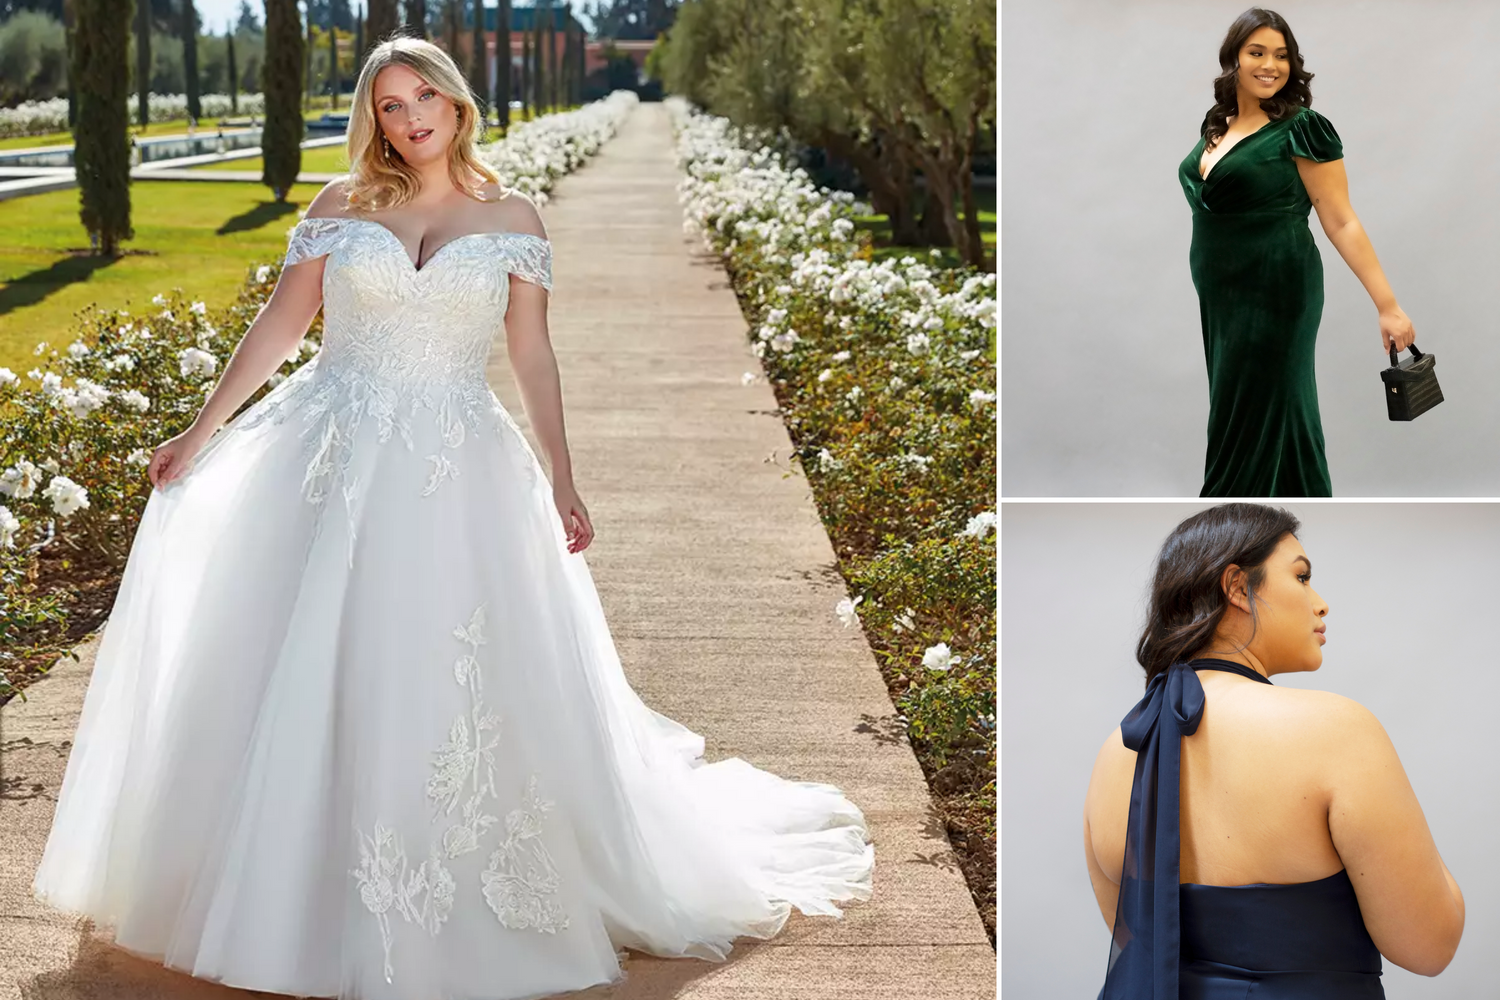 How To Find The Perfect Bridesmaid Dresses